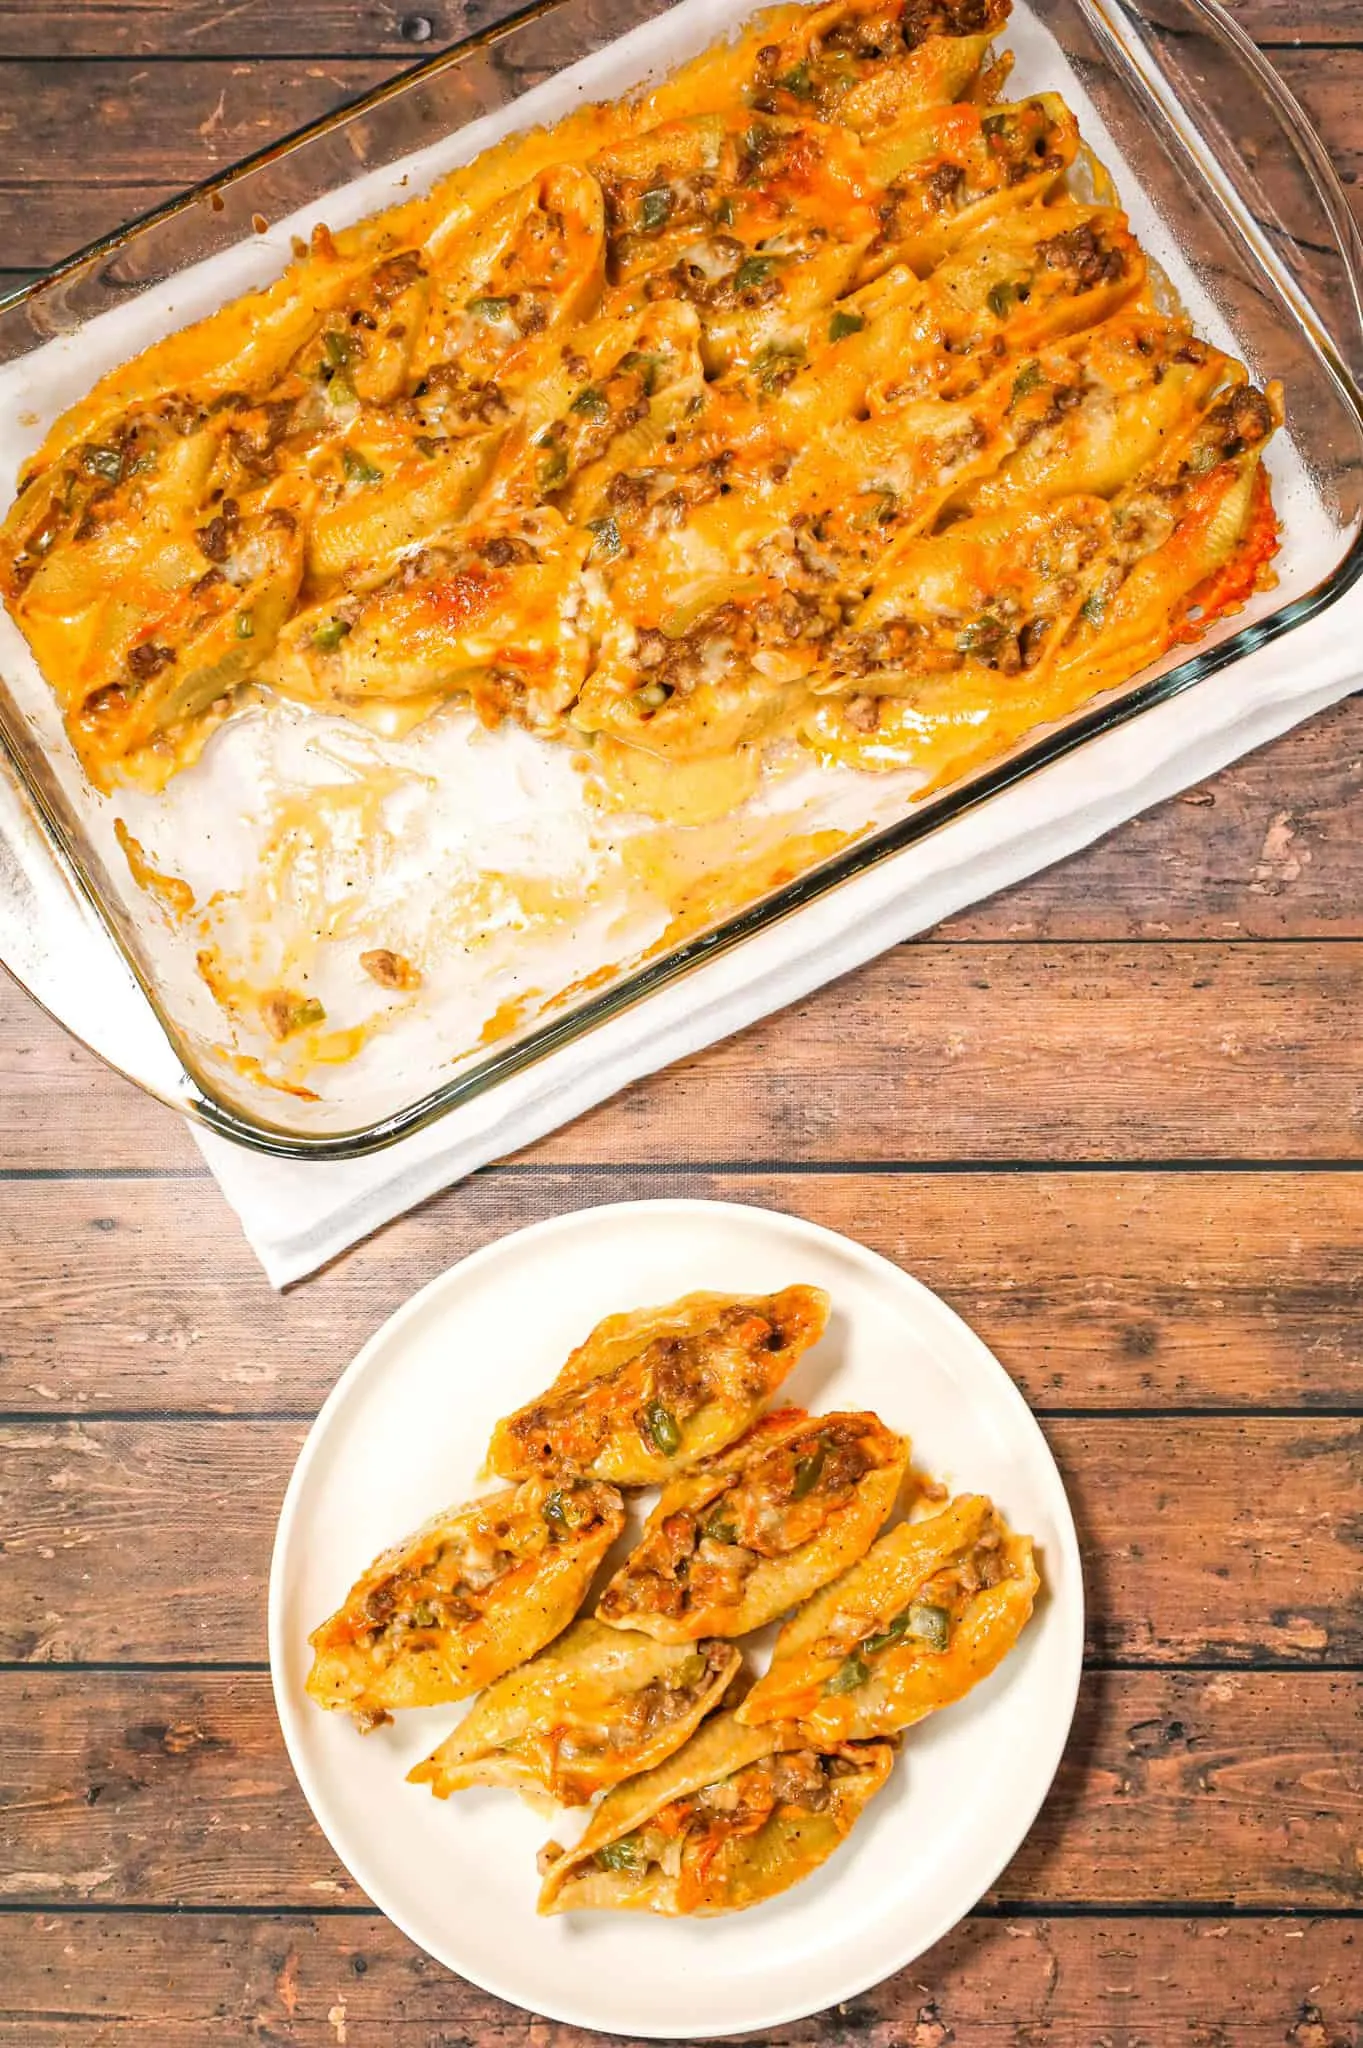 Philly Cheese Steak Stuffed Shells are a hearty pasta recipe loaded with ground beef, diced onions, green peppers, brown gravy mix, cheddar soup and shredded cheddar cheese.